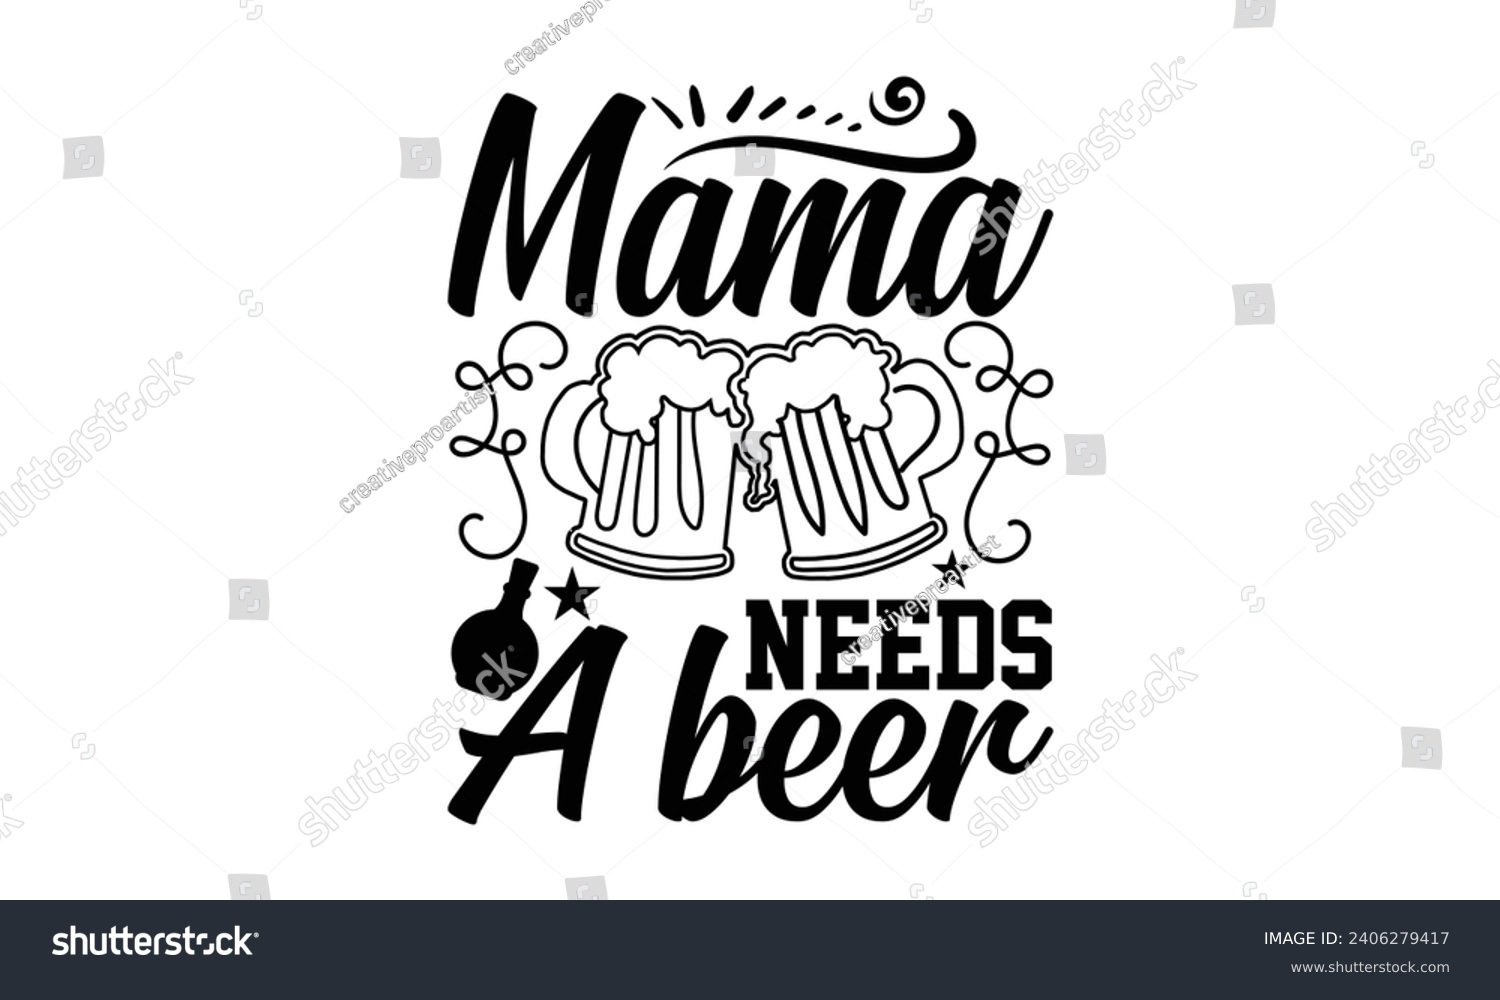 SVG of Mama Needs A Beer- Beer t- shirt design, Handmade calligraphy vector illustration for Cutting Machine, Silhouette Cameo, Cricut, Vector illustration Template. svg